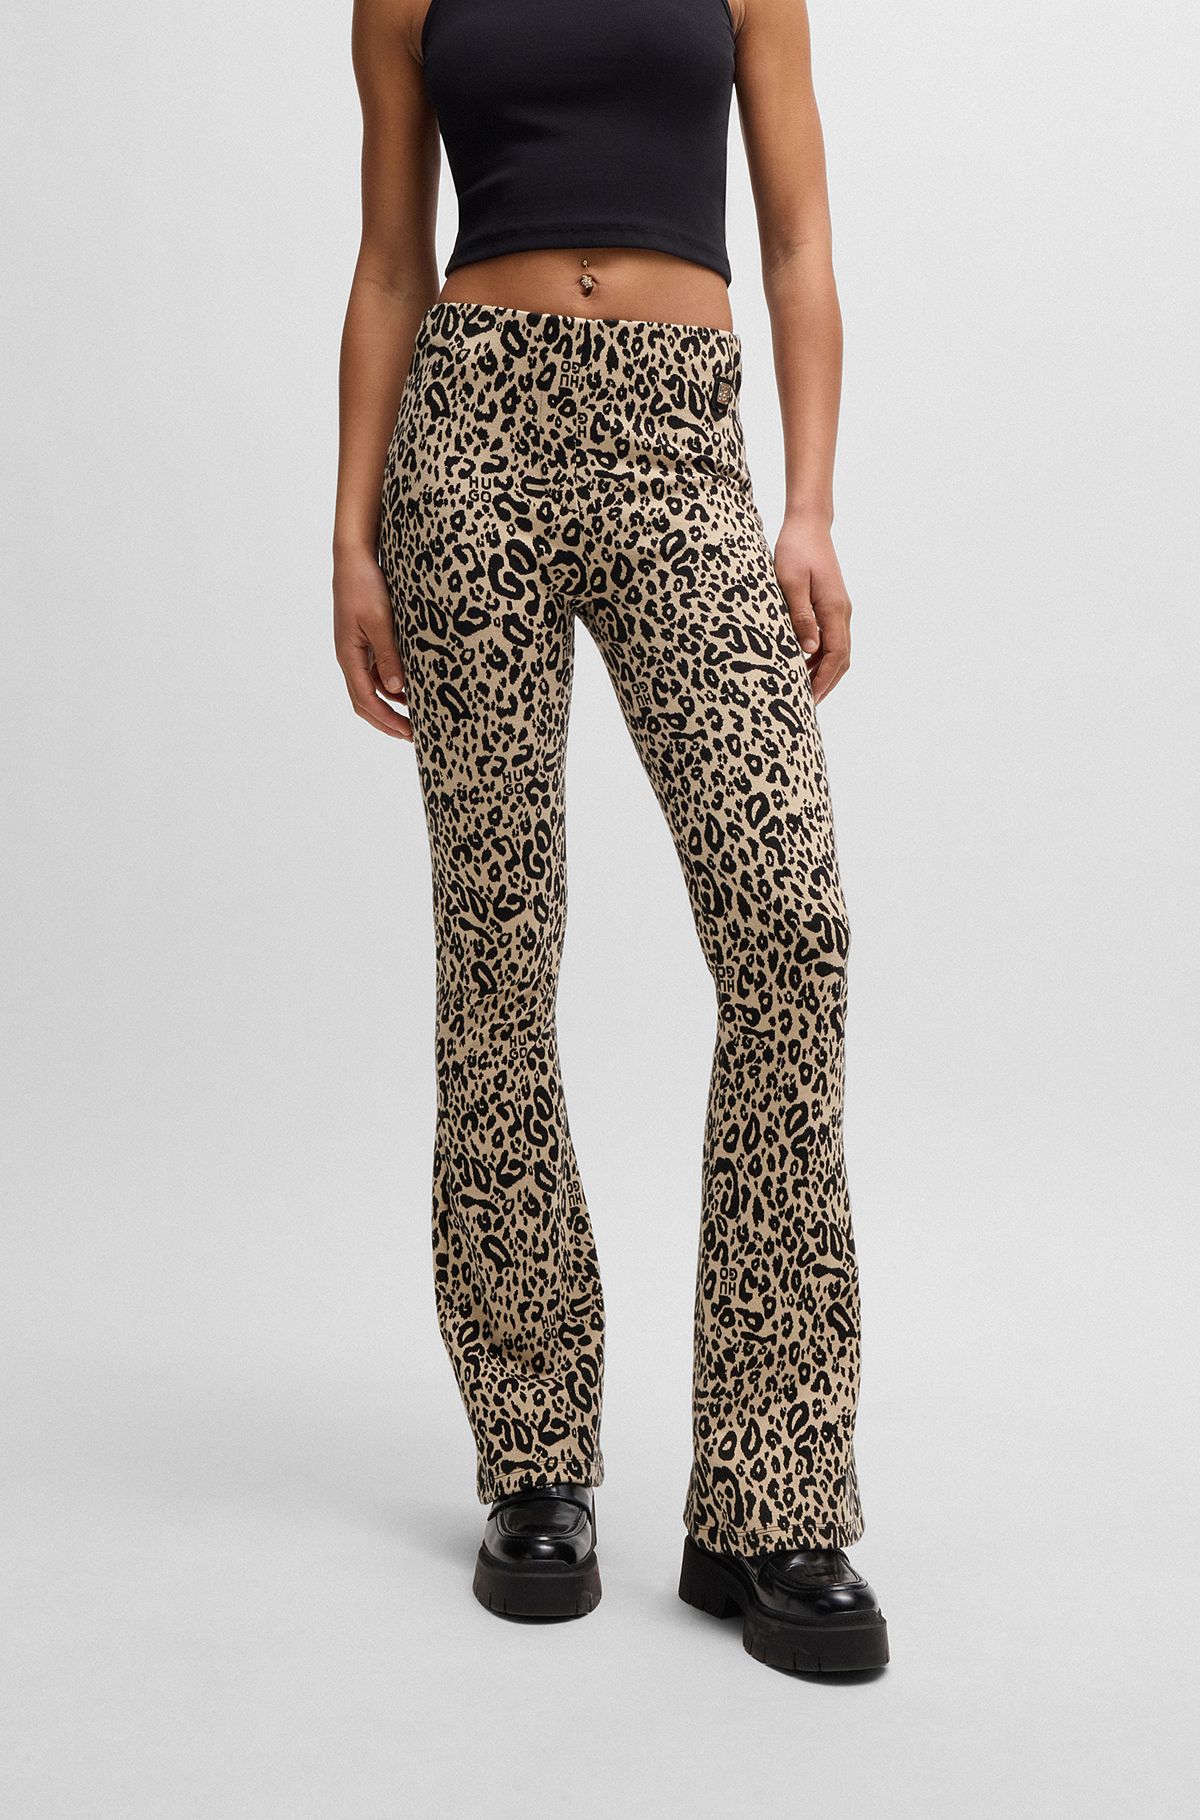 Slim-fit animal-print trousers with flared leg, Patterned